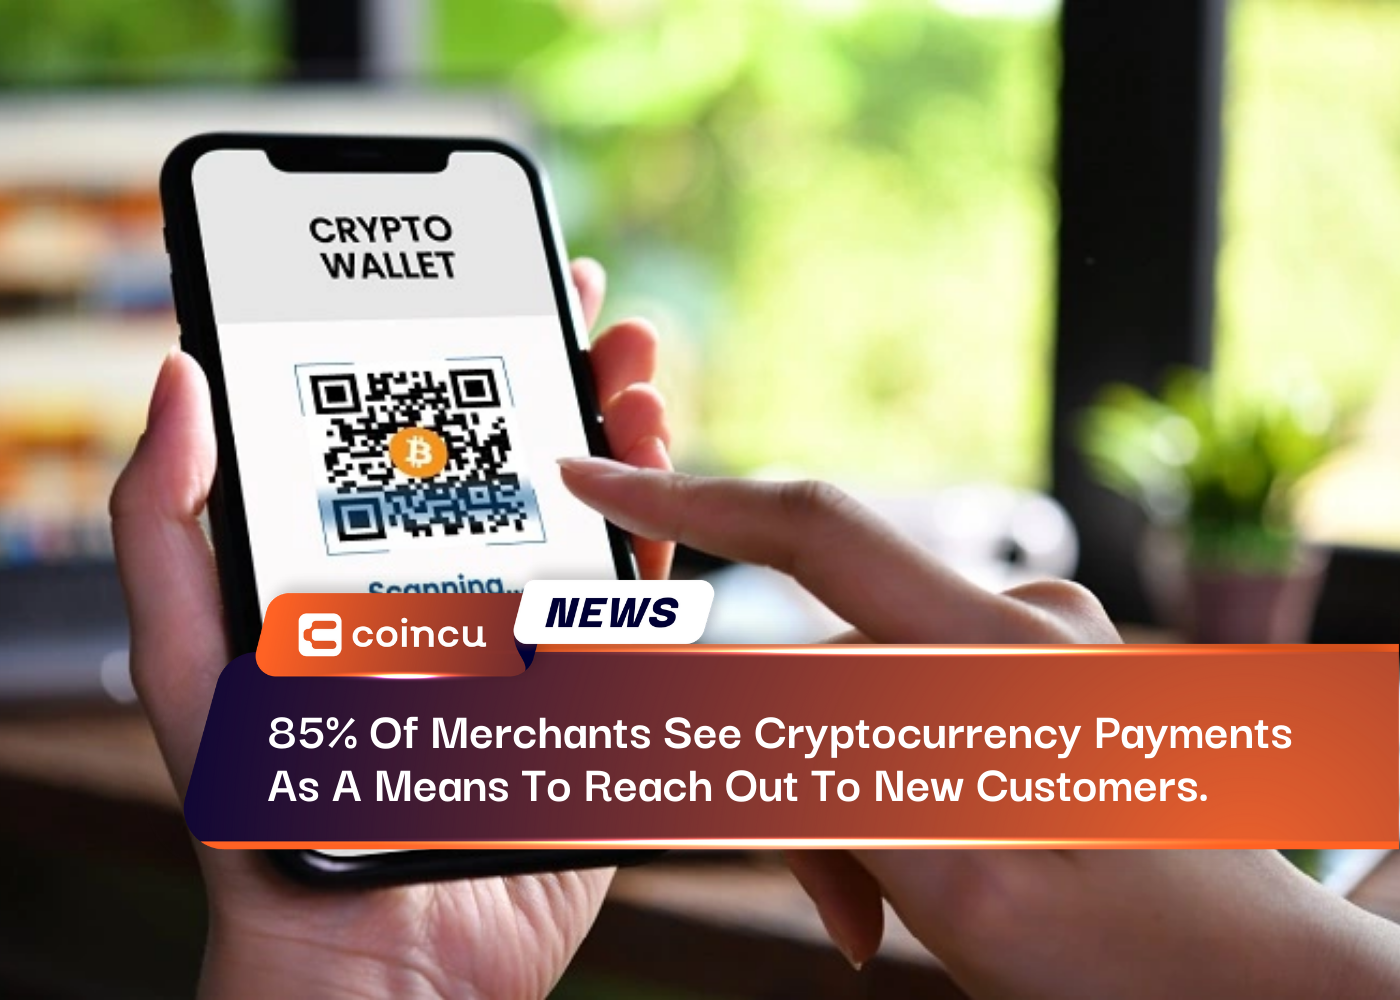 85% Of Merchants See Cryptocurrency Payments As A Means To Reach Out To New Customers.